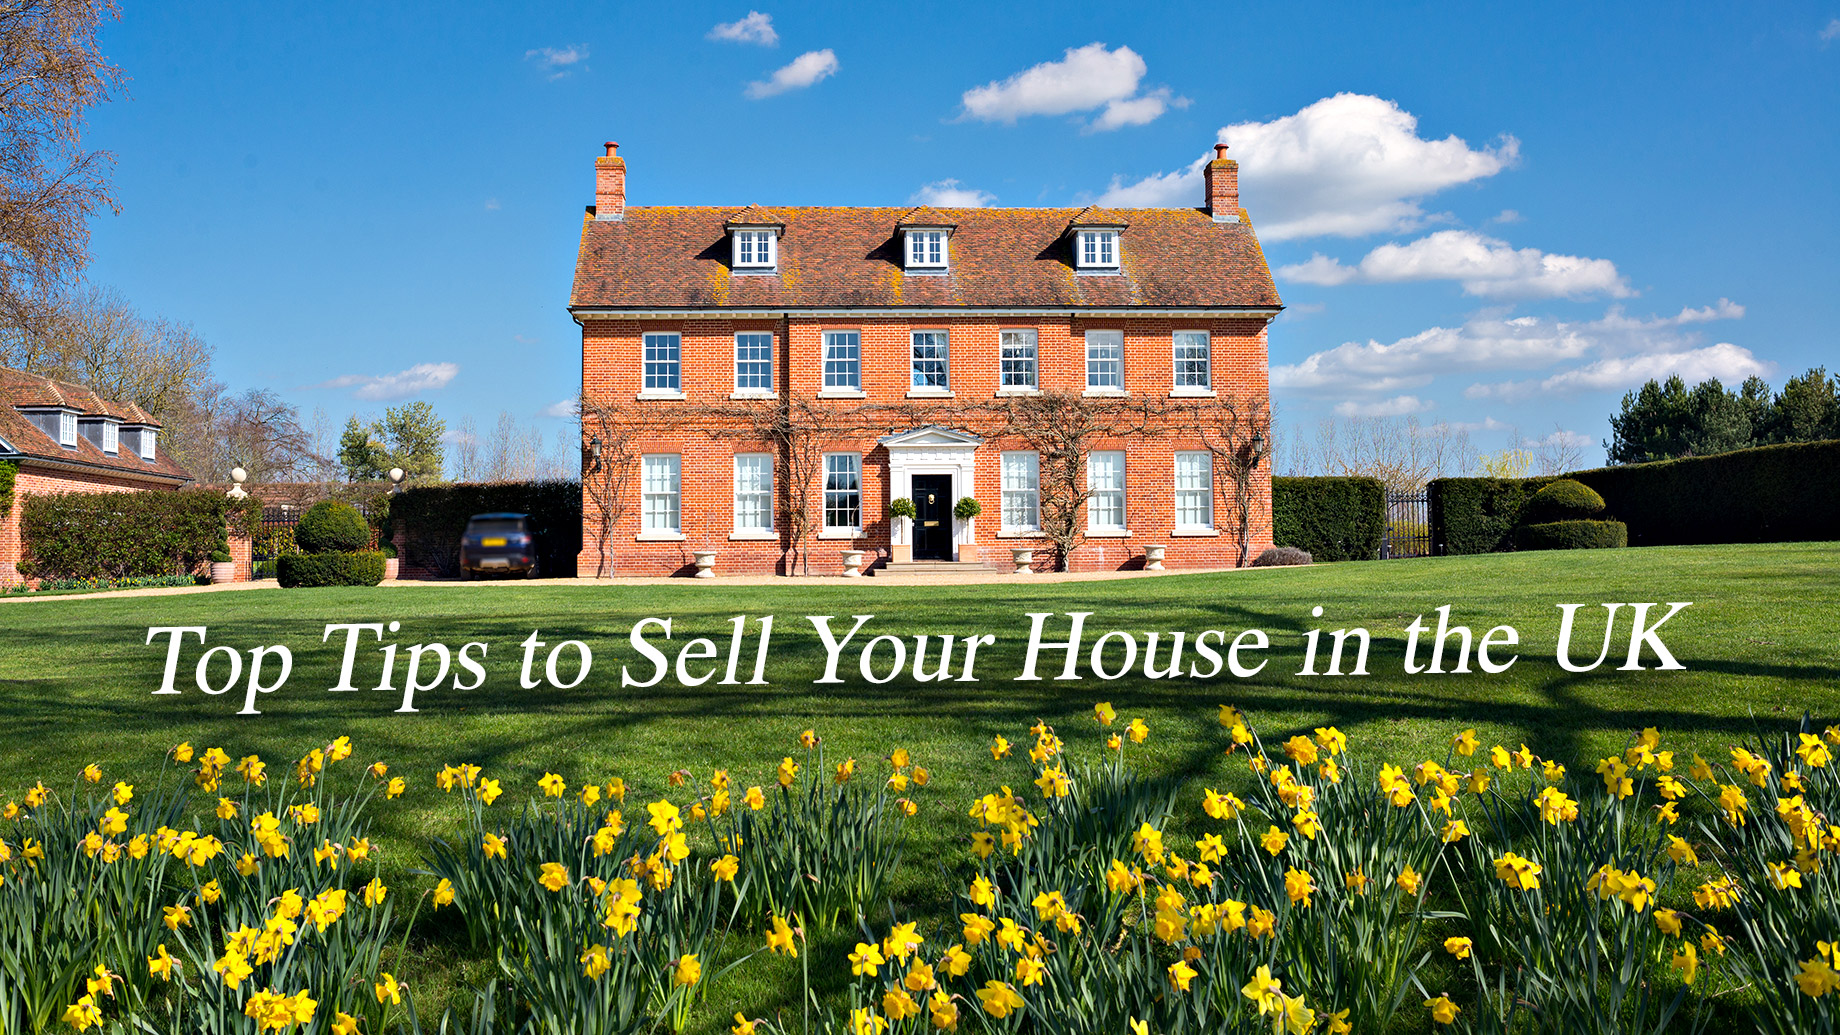 Top Tips to Sell Your House in the UK